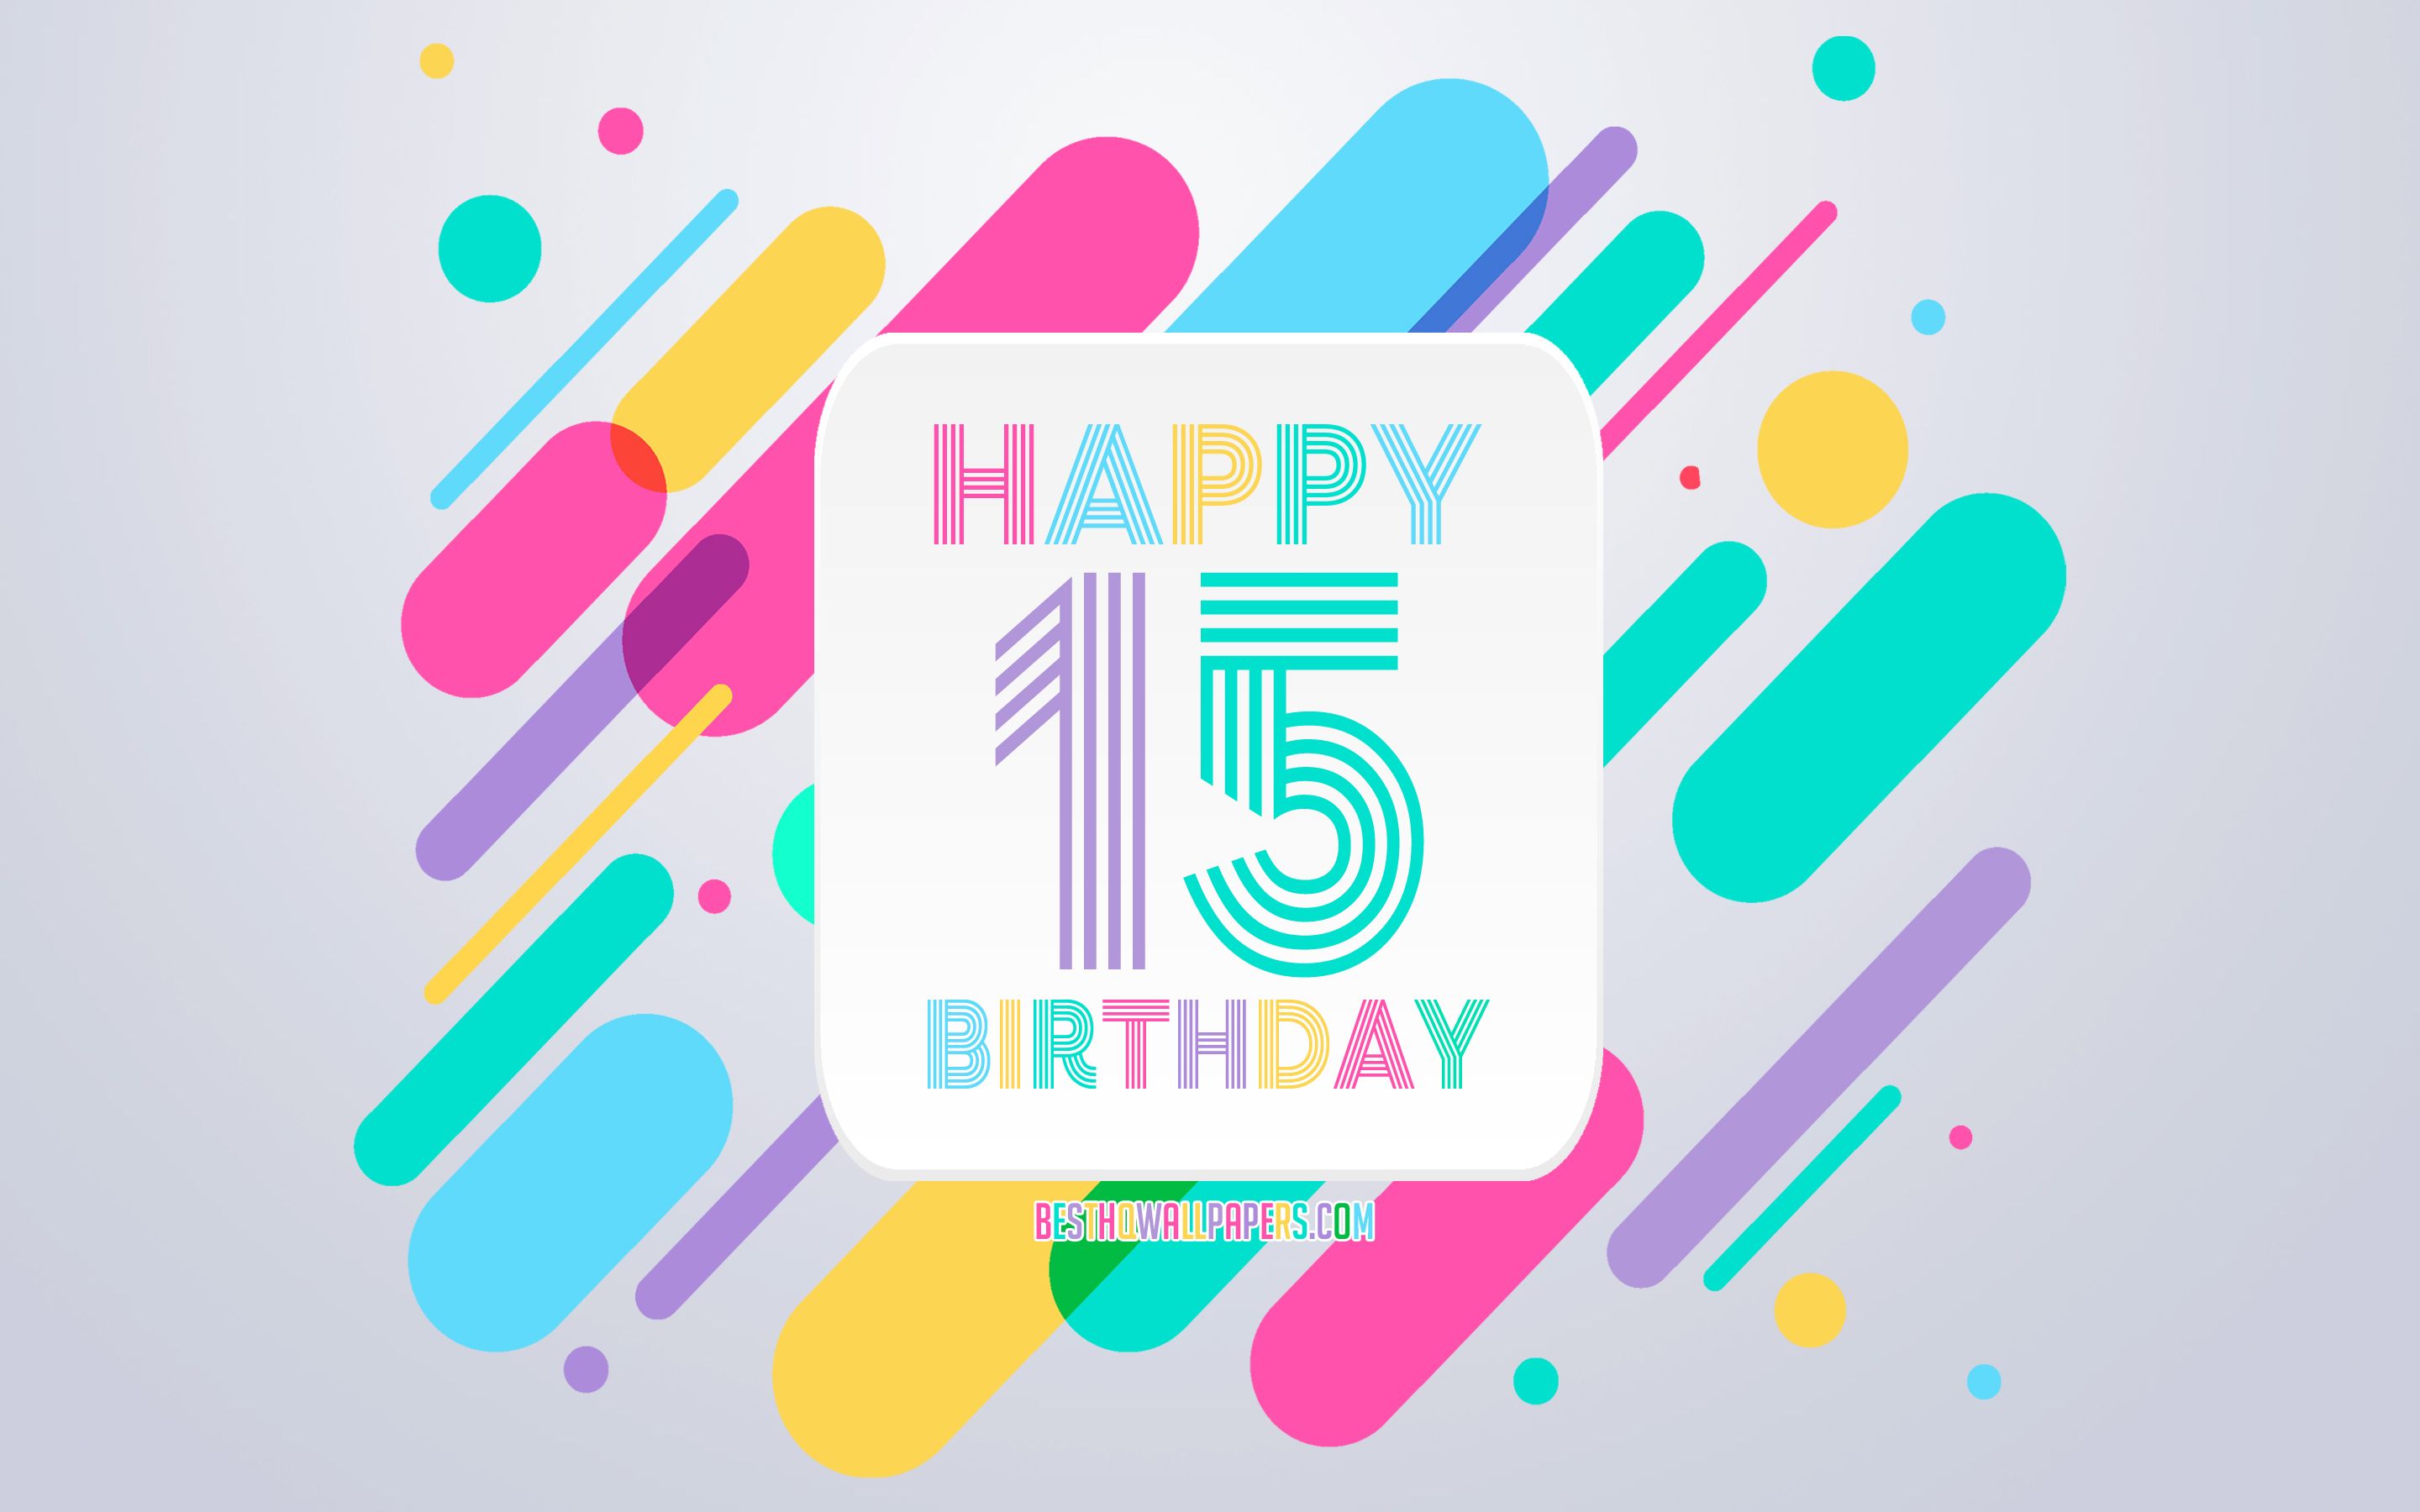 Download wallpaper Happy 15 Years Birthday, Abstract Birthday Background, Happy 15th Birthday, Colorful Abstraction, 15th Happy Birthday, Birthday lines background, 15 Years Birthday, 15 Years Birthday party for desktop with resolution 2880x1800